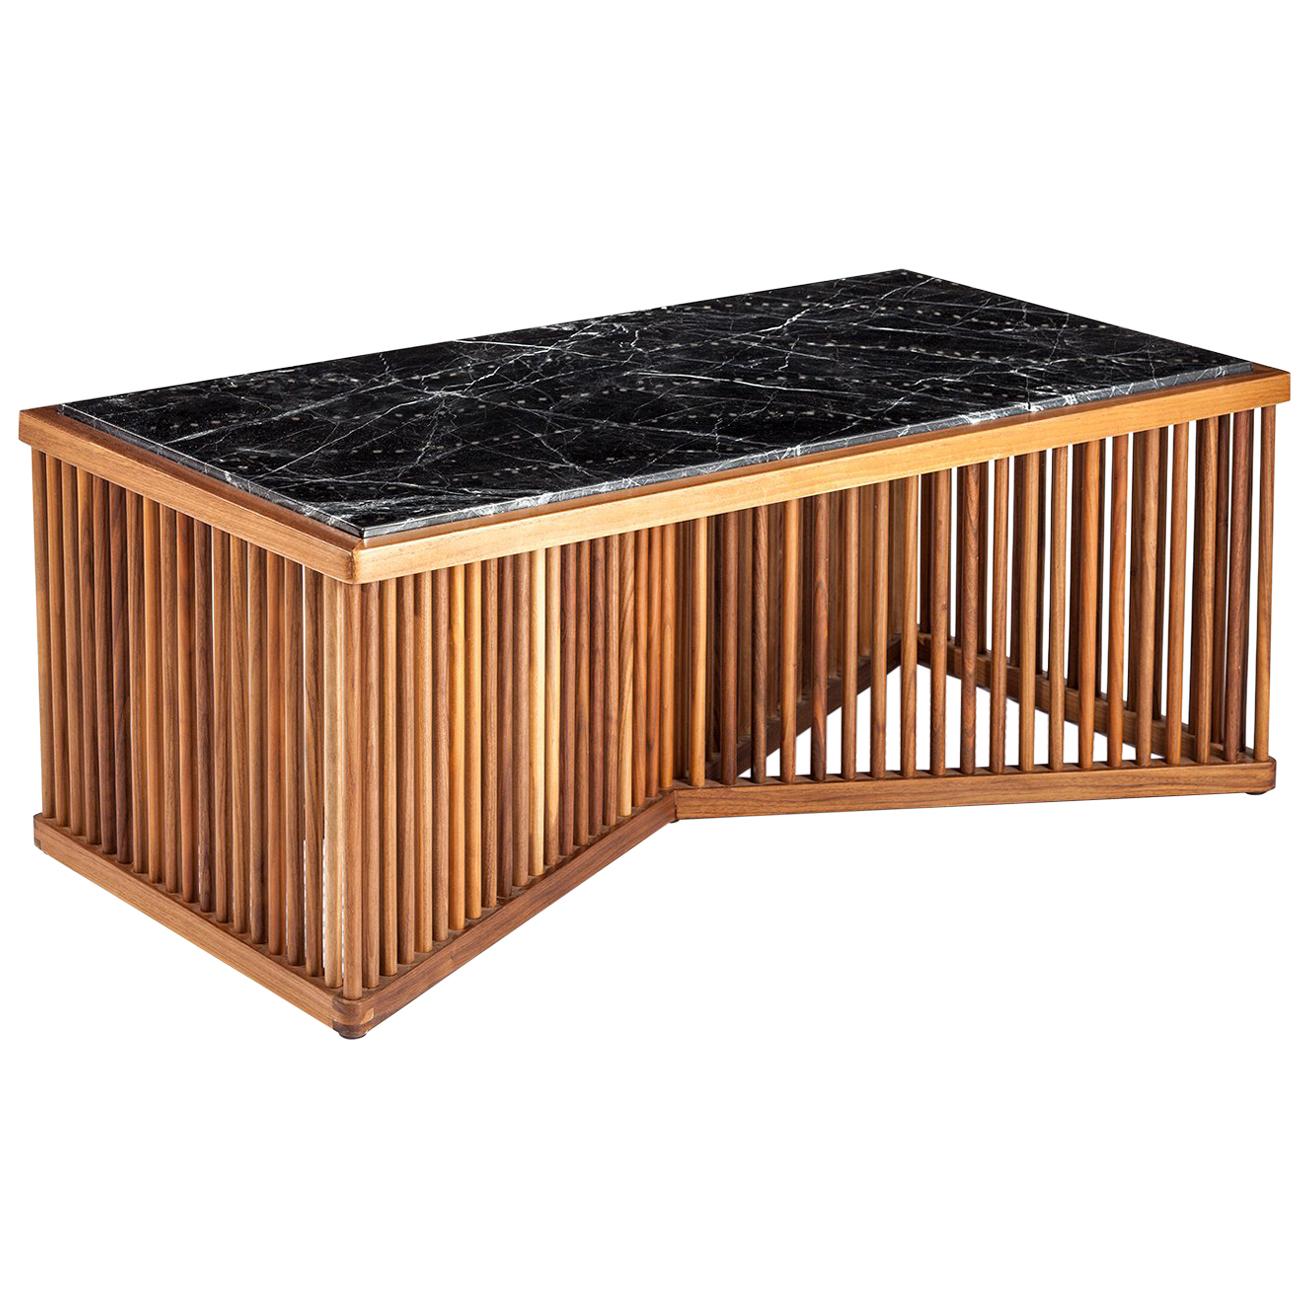 Cage Table, Mid-Century Modern Center or Coffee Table